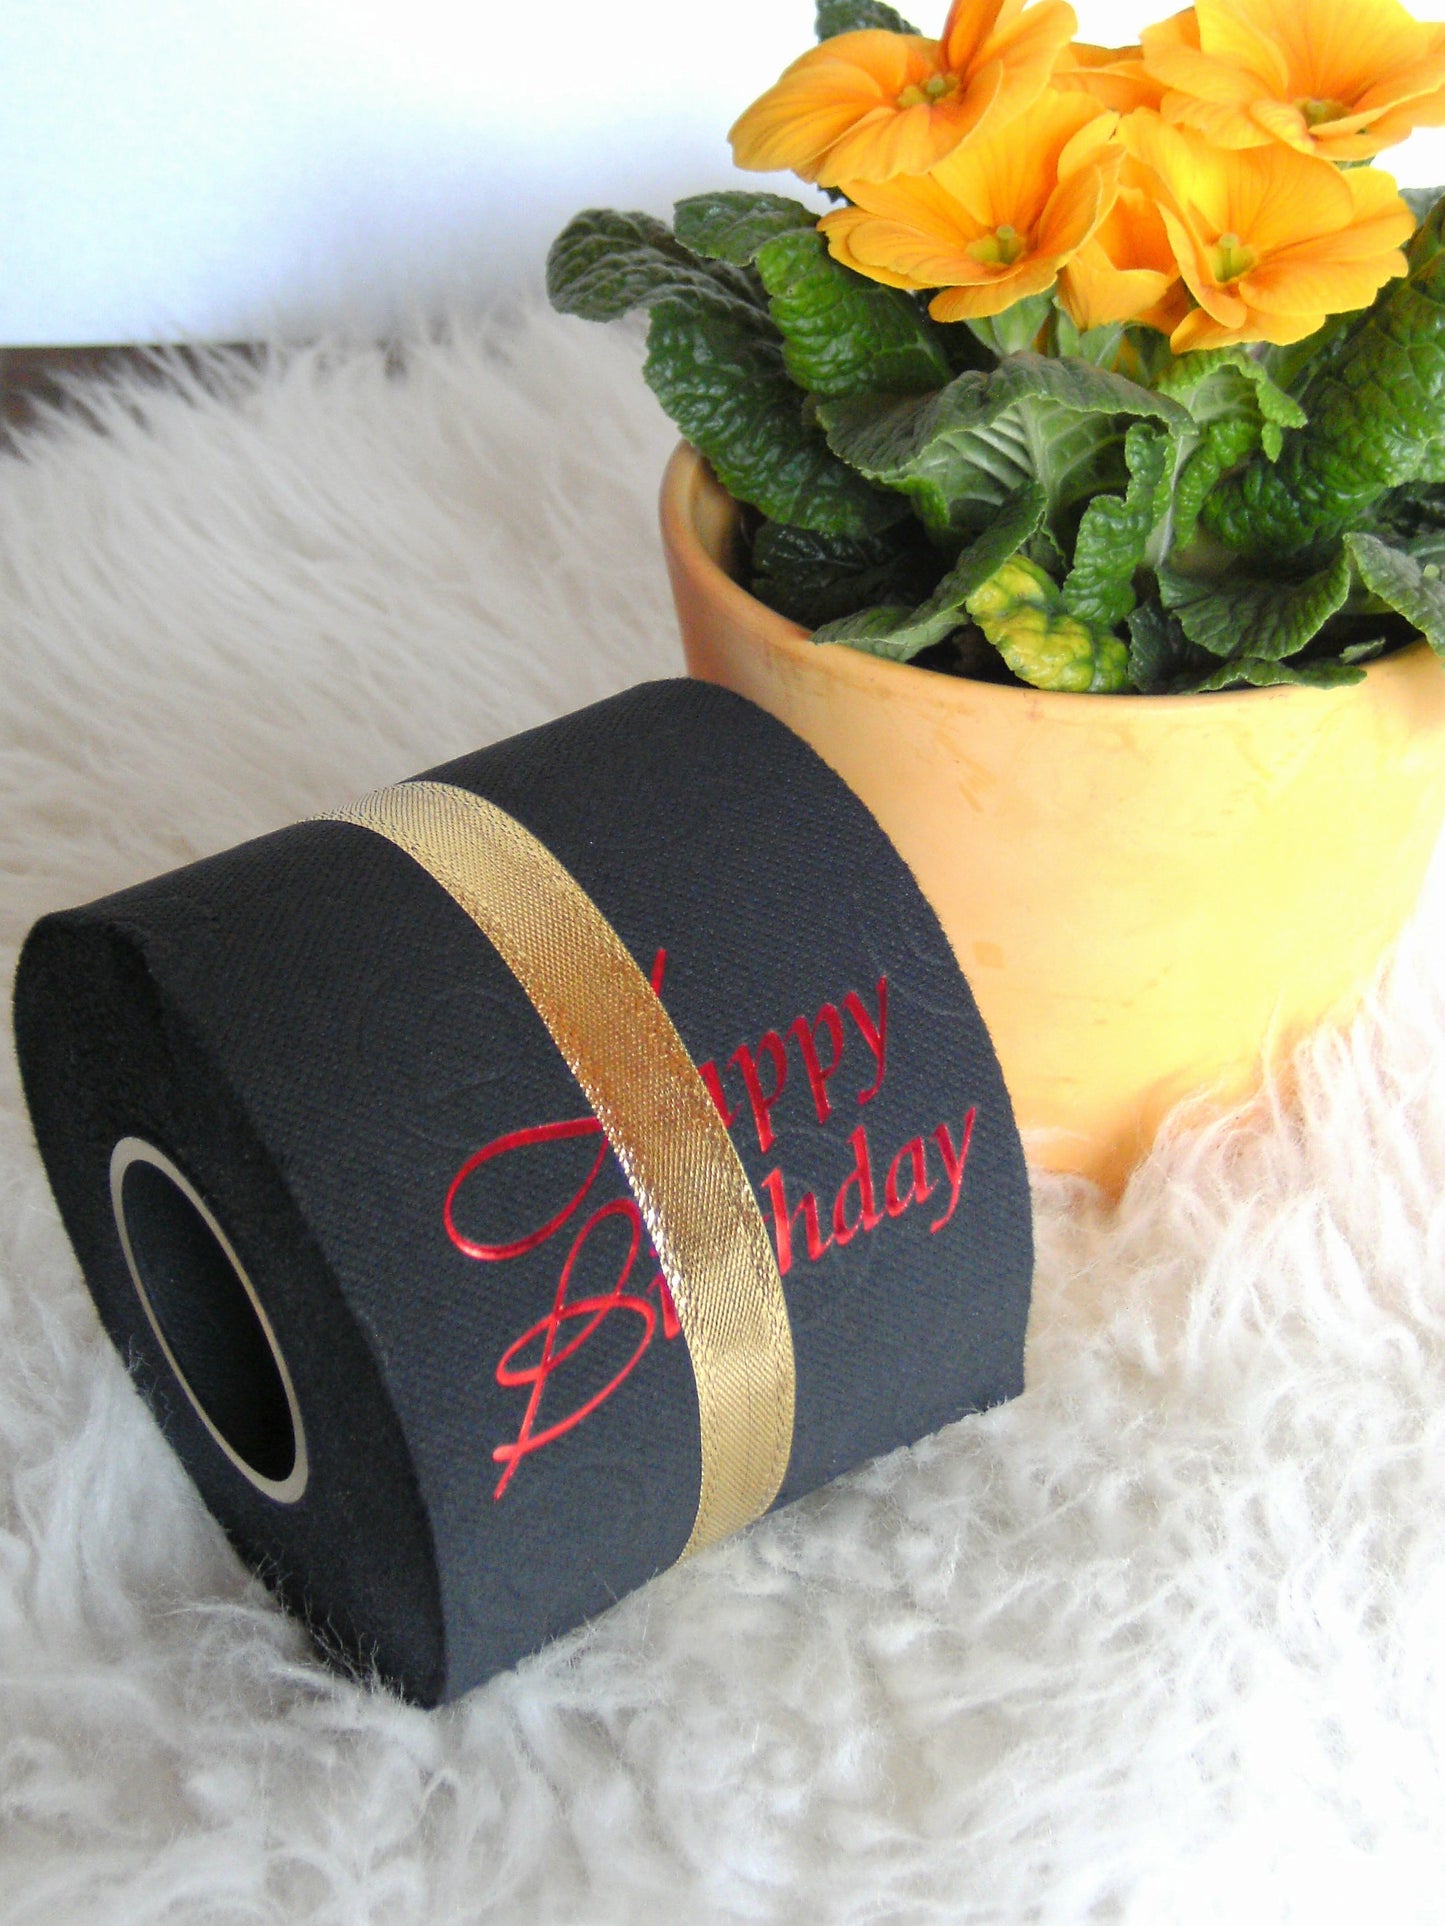 Special embossing “Happy Birthday”